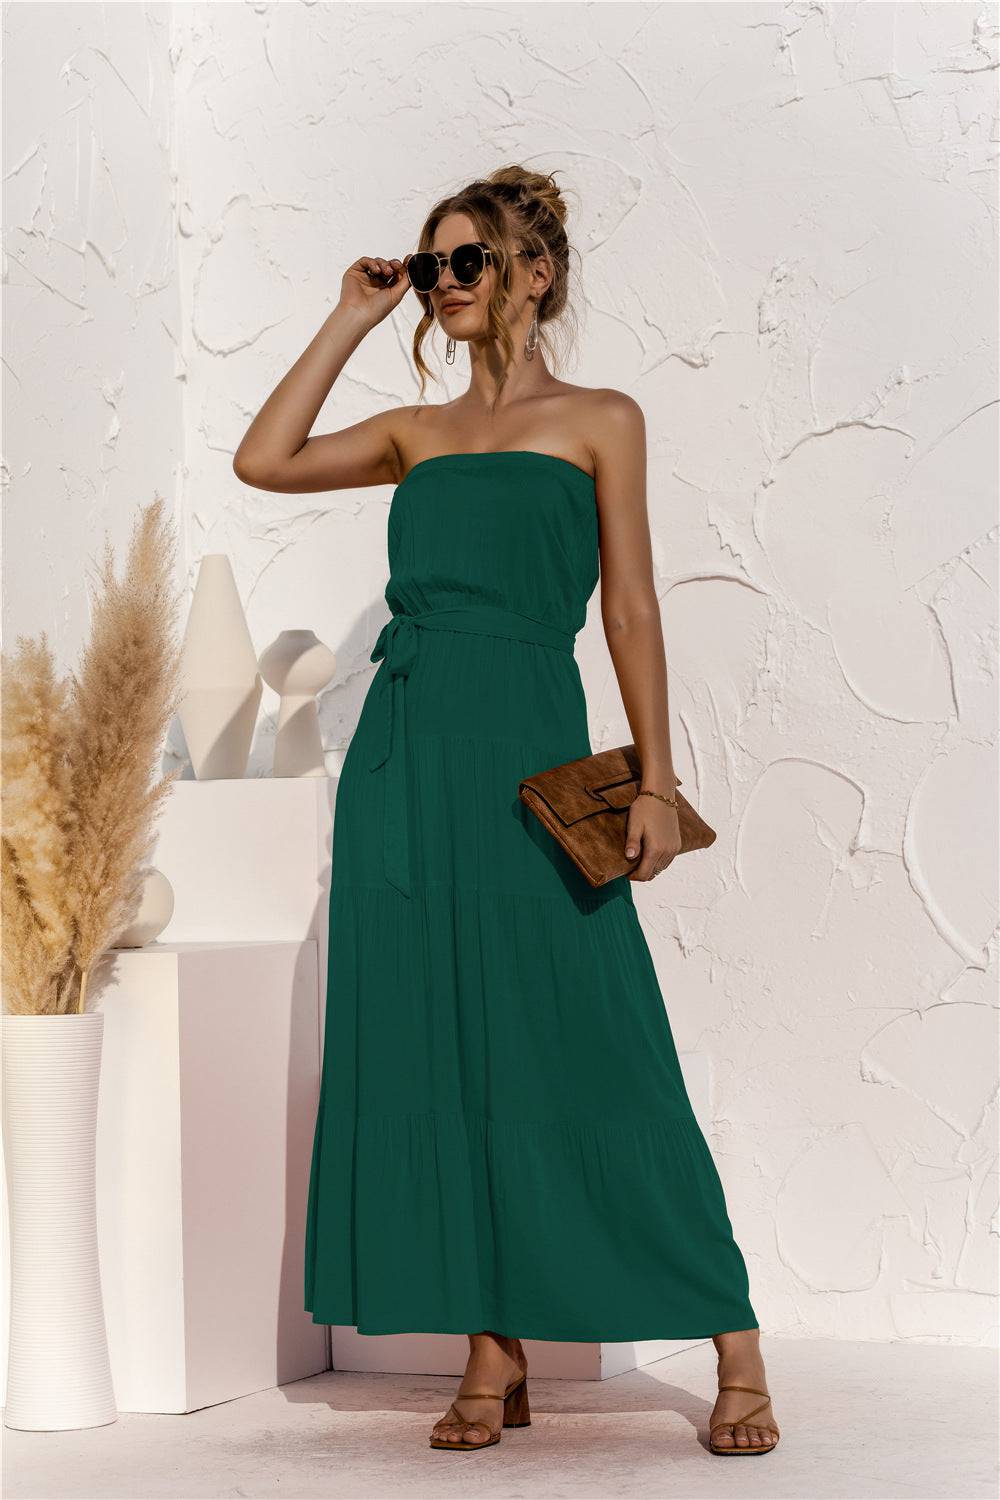 Enchanted Dreams Strapless Maxi Dress - Embrace Romance and Captivate Hearts with Every Step - Guy Christopher